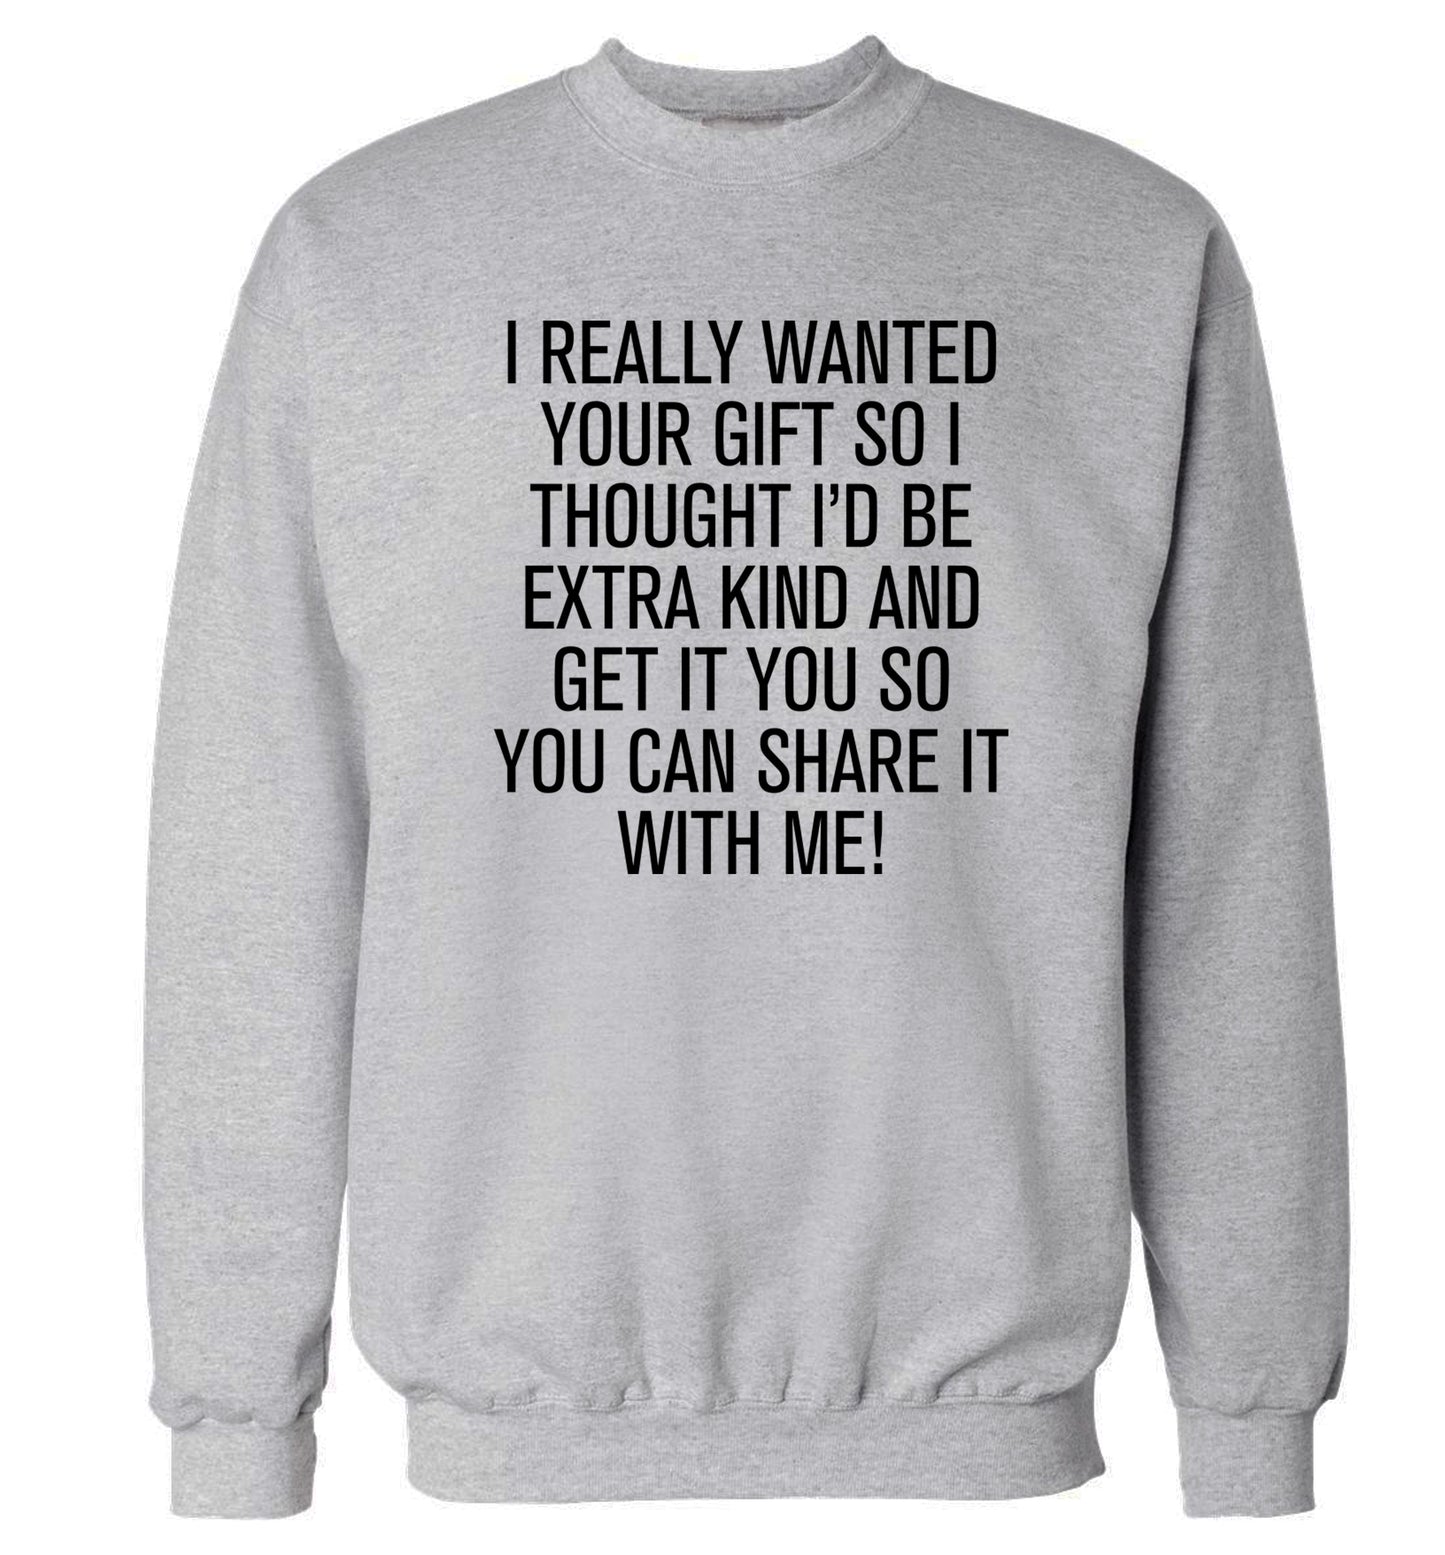 I really wanted your gift Adult's unisex grey Sweater 2XL